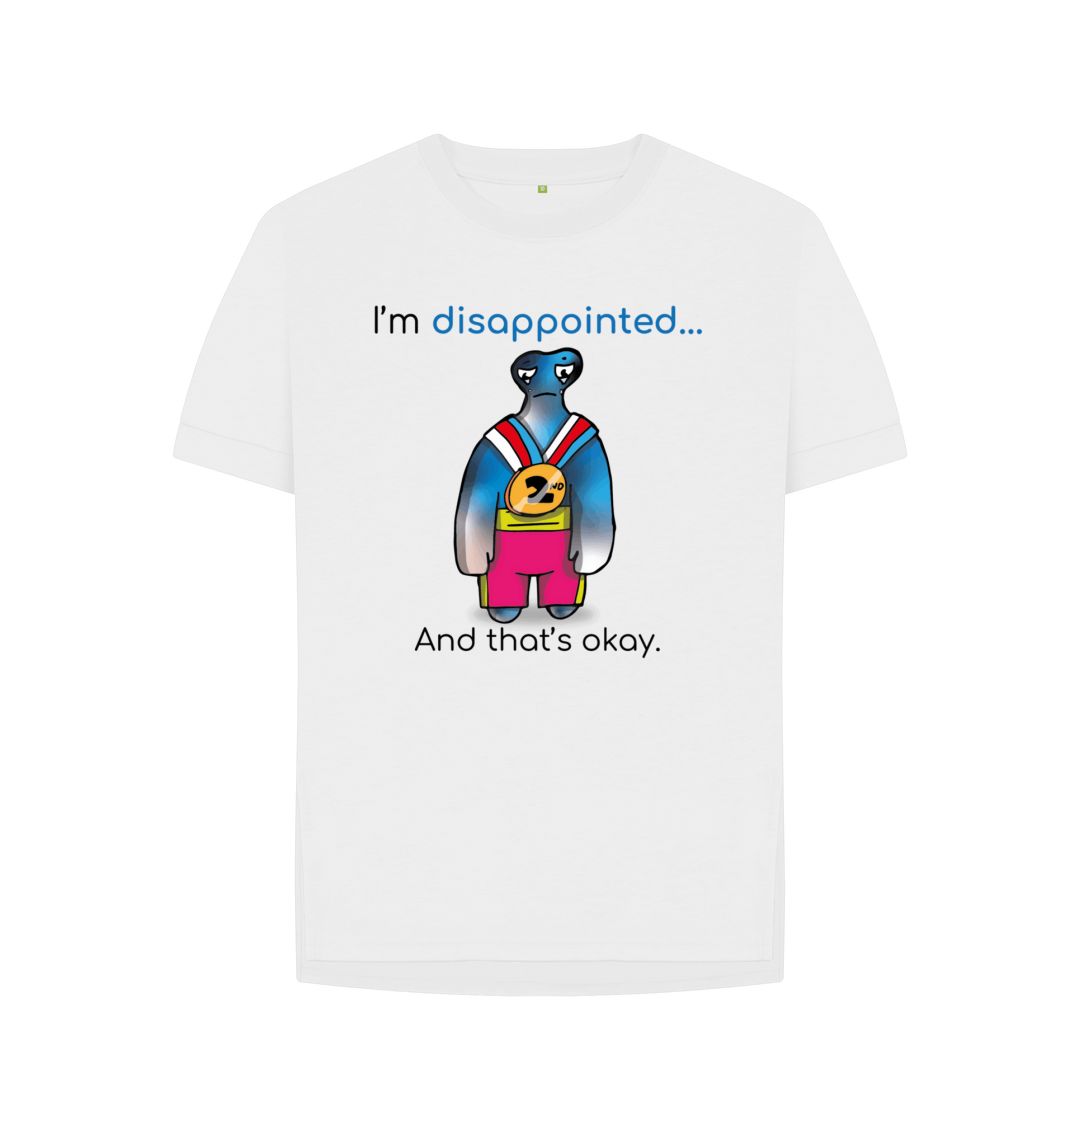 White Disappointed Emotion Woman's Relaxed Organic Mental Health T-Shirt